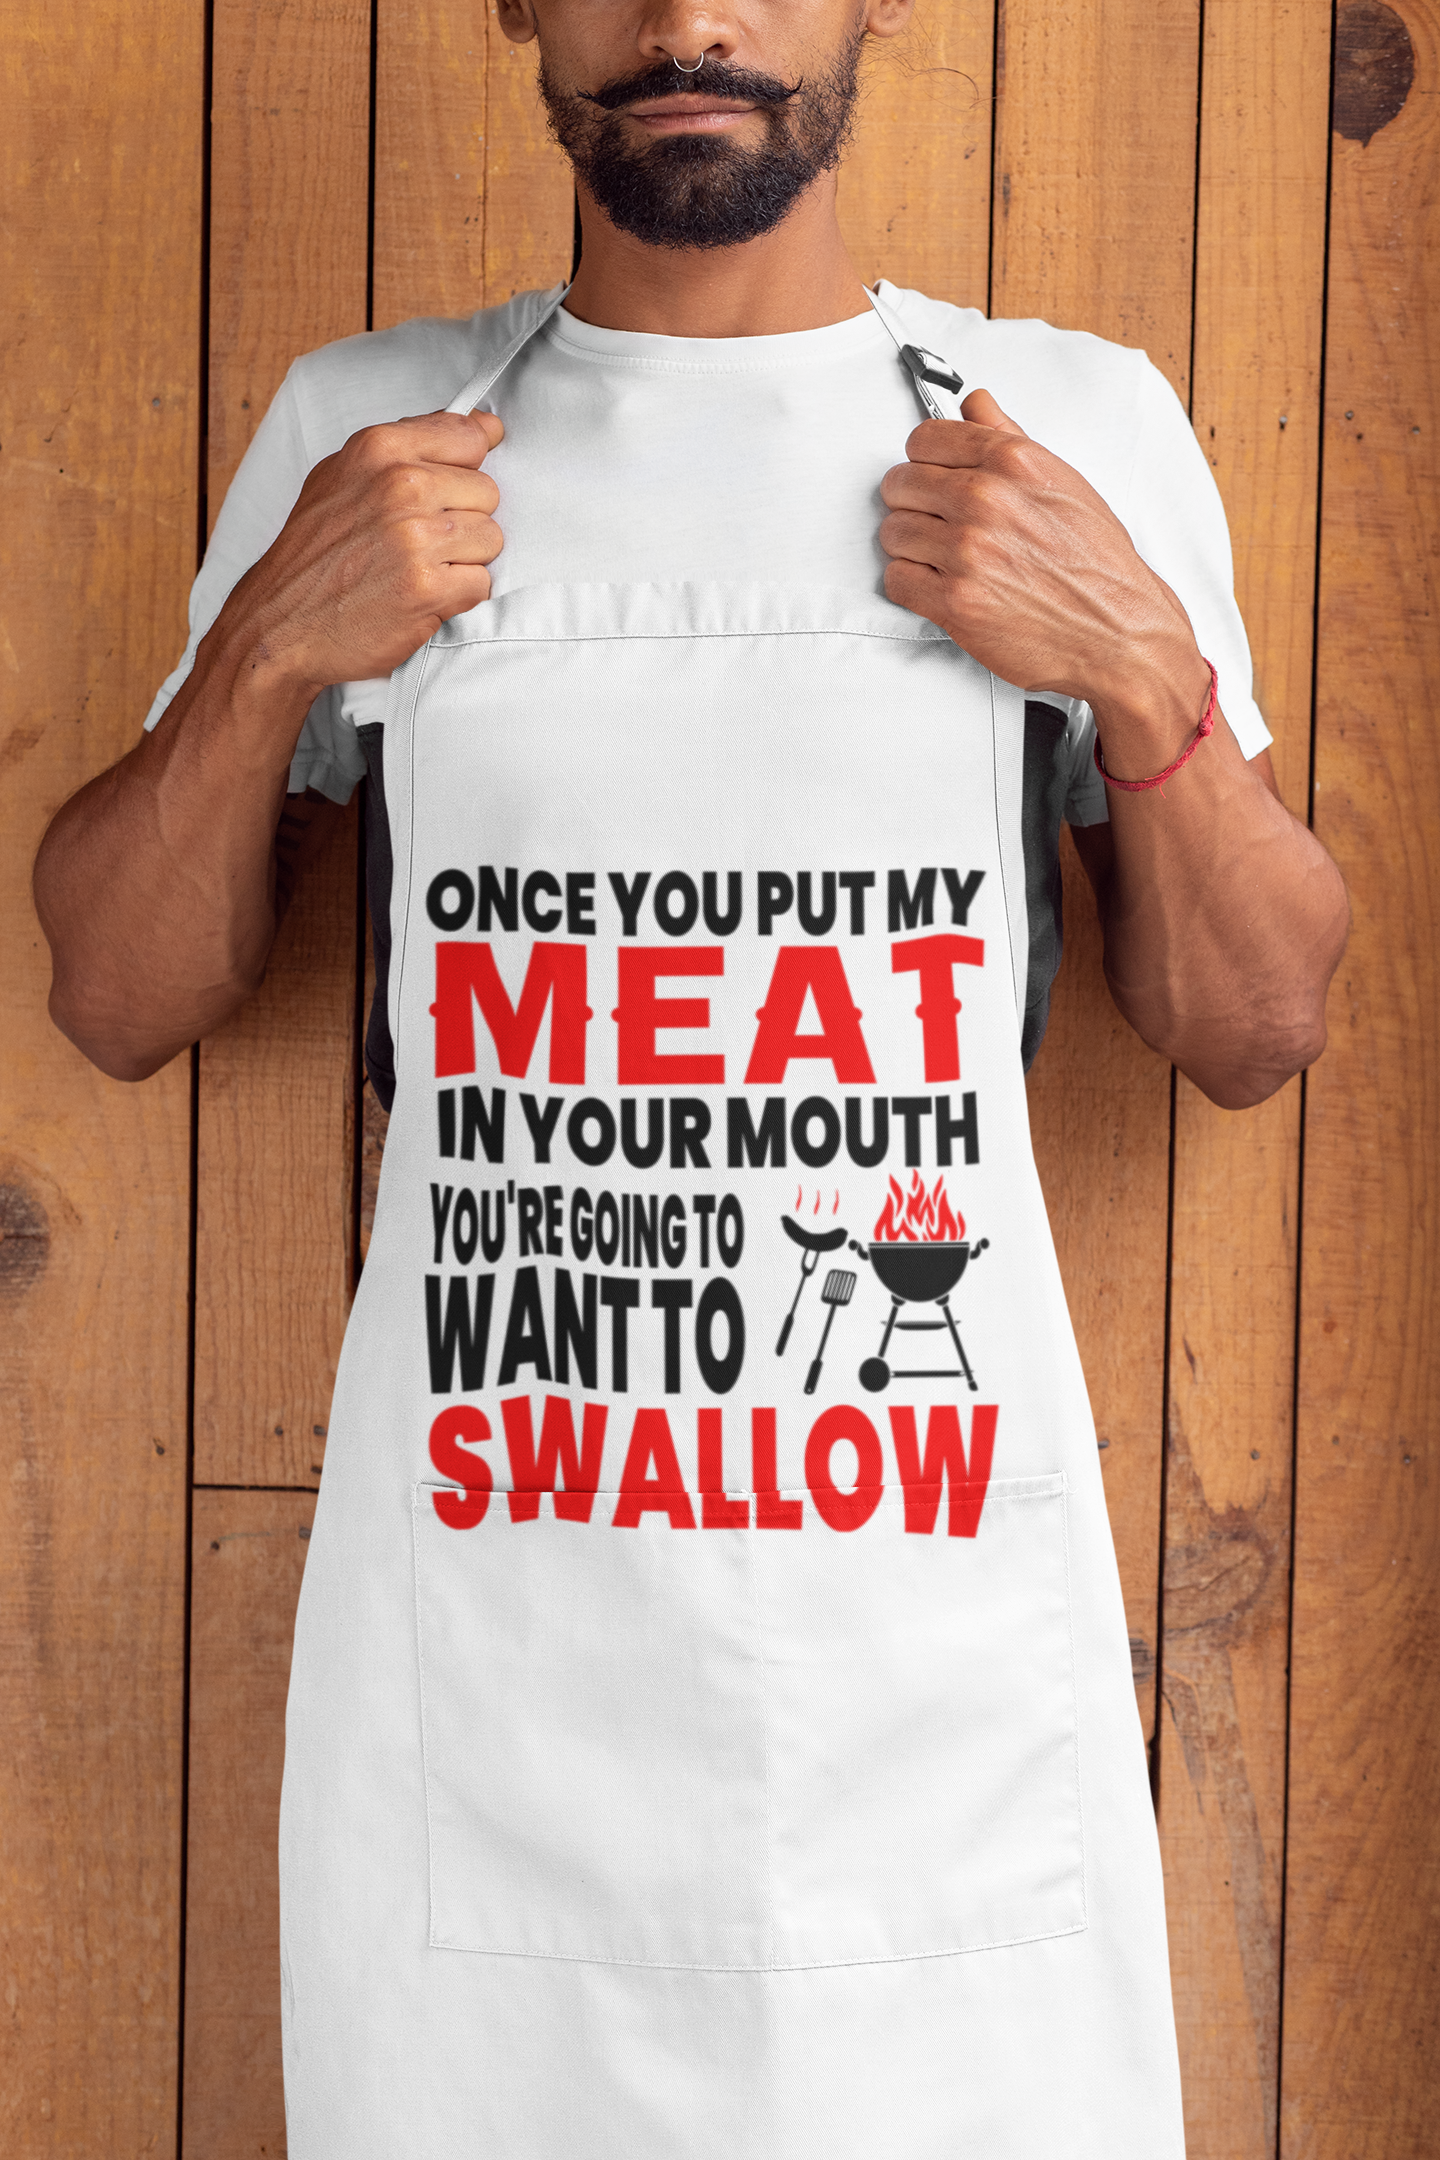 ONCE YOU PUT MY MEAT IN YOUR MOUTH YOUR GOING TO WANT TO SWALLOW